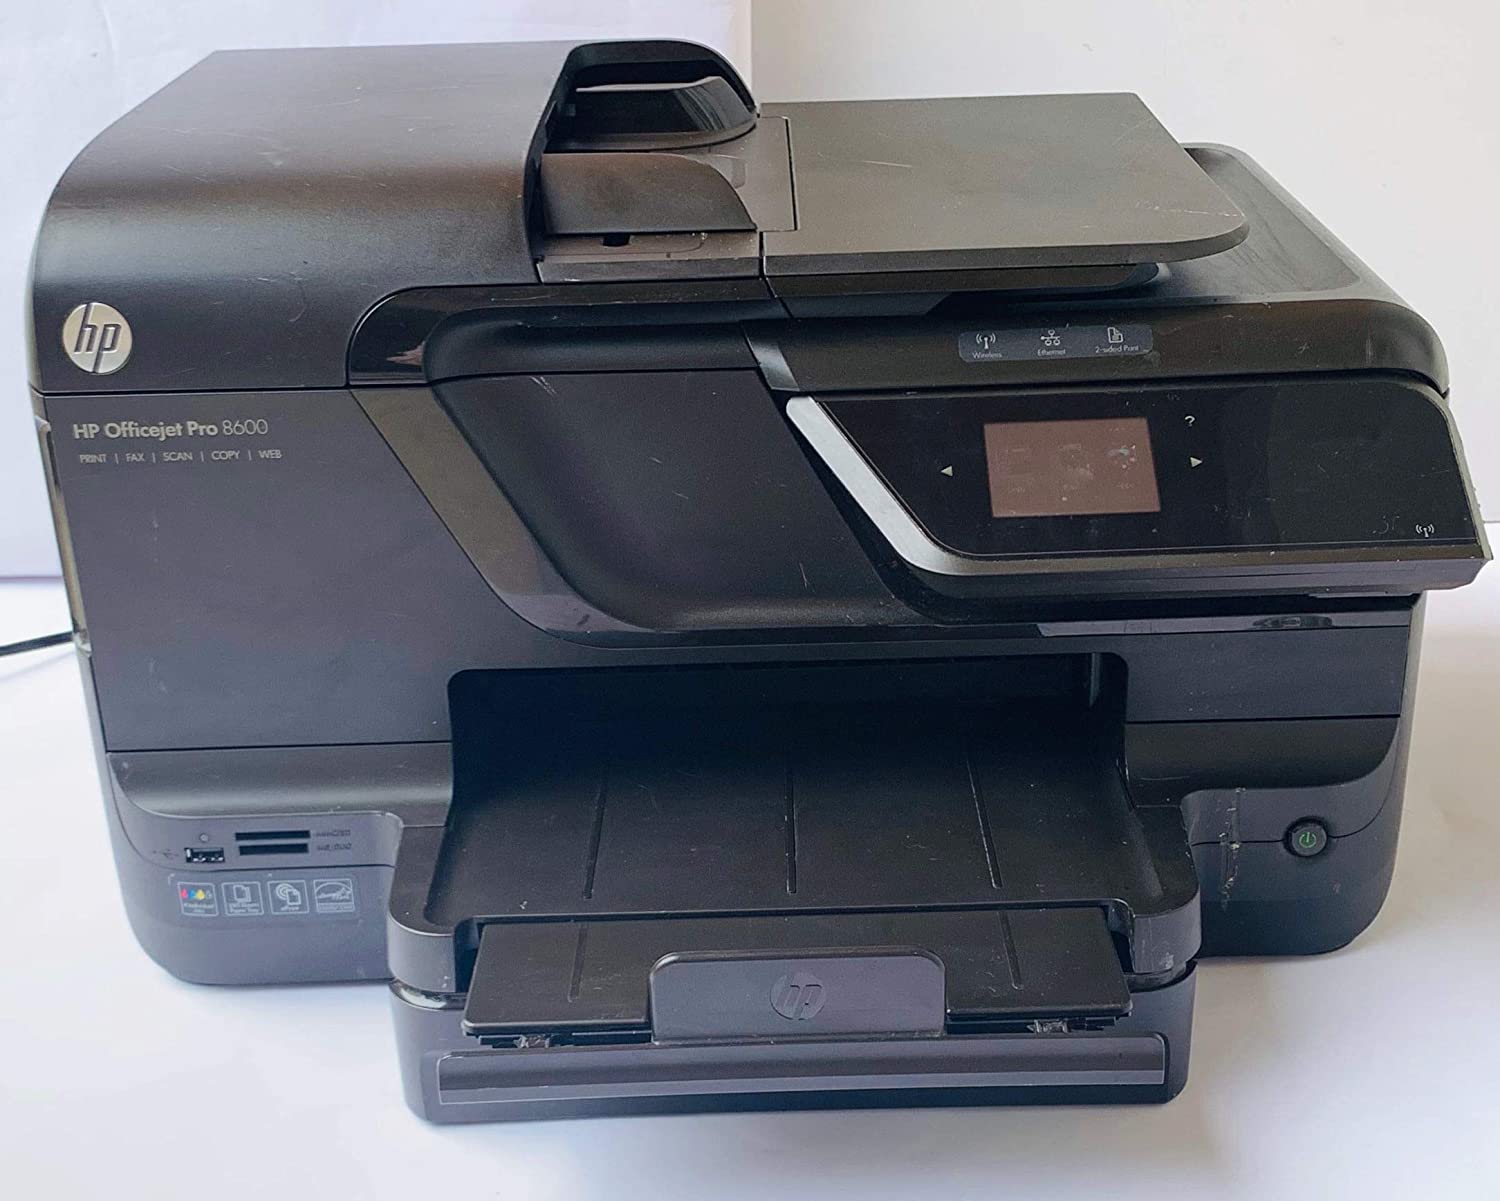 hp officejet pro 8600 plus e-all-in-one driver for mac